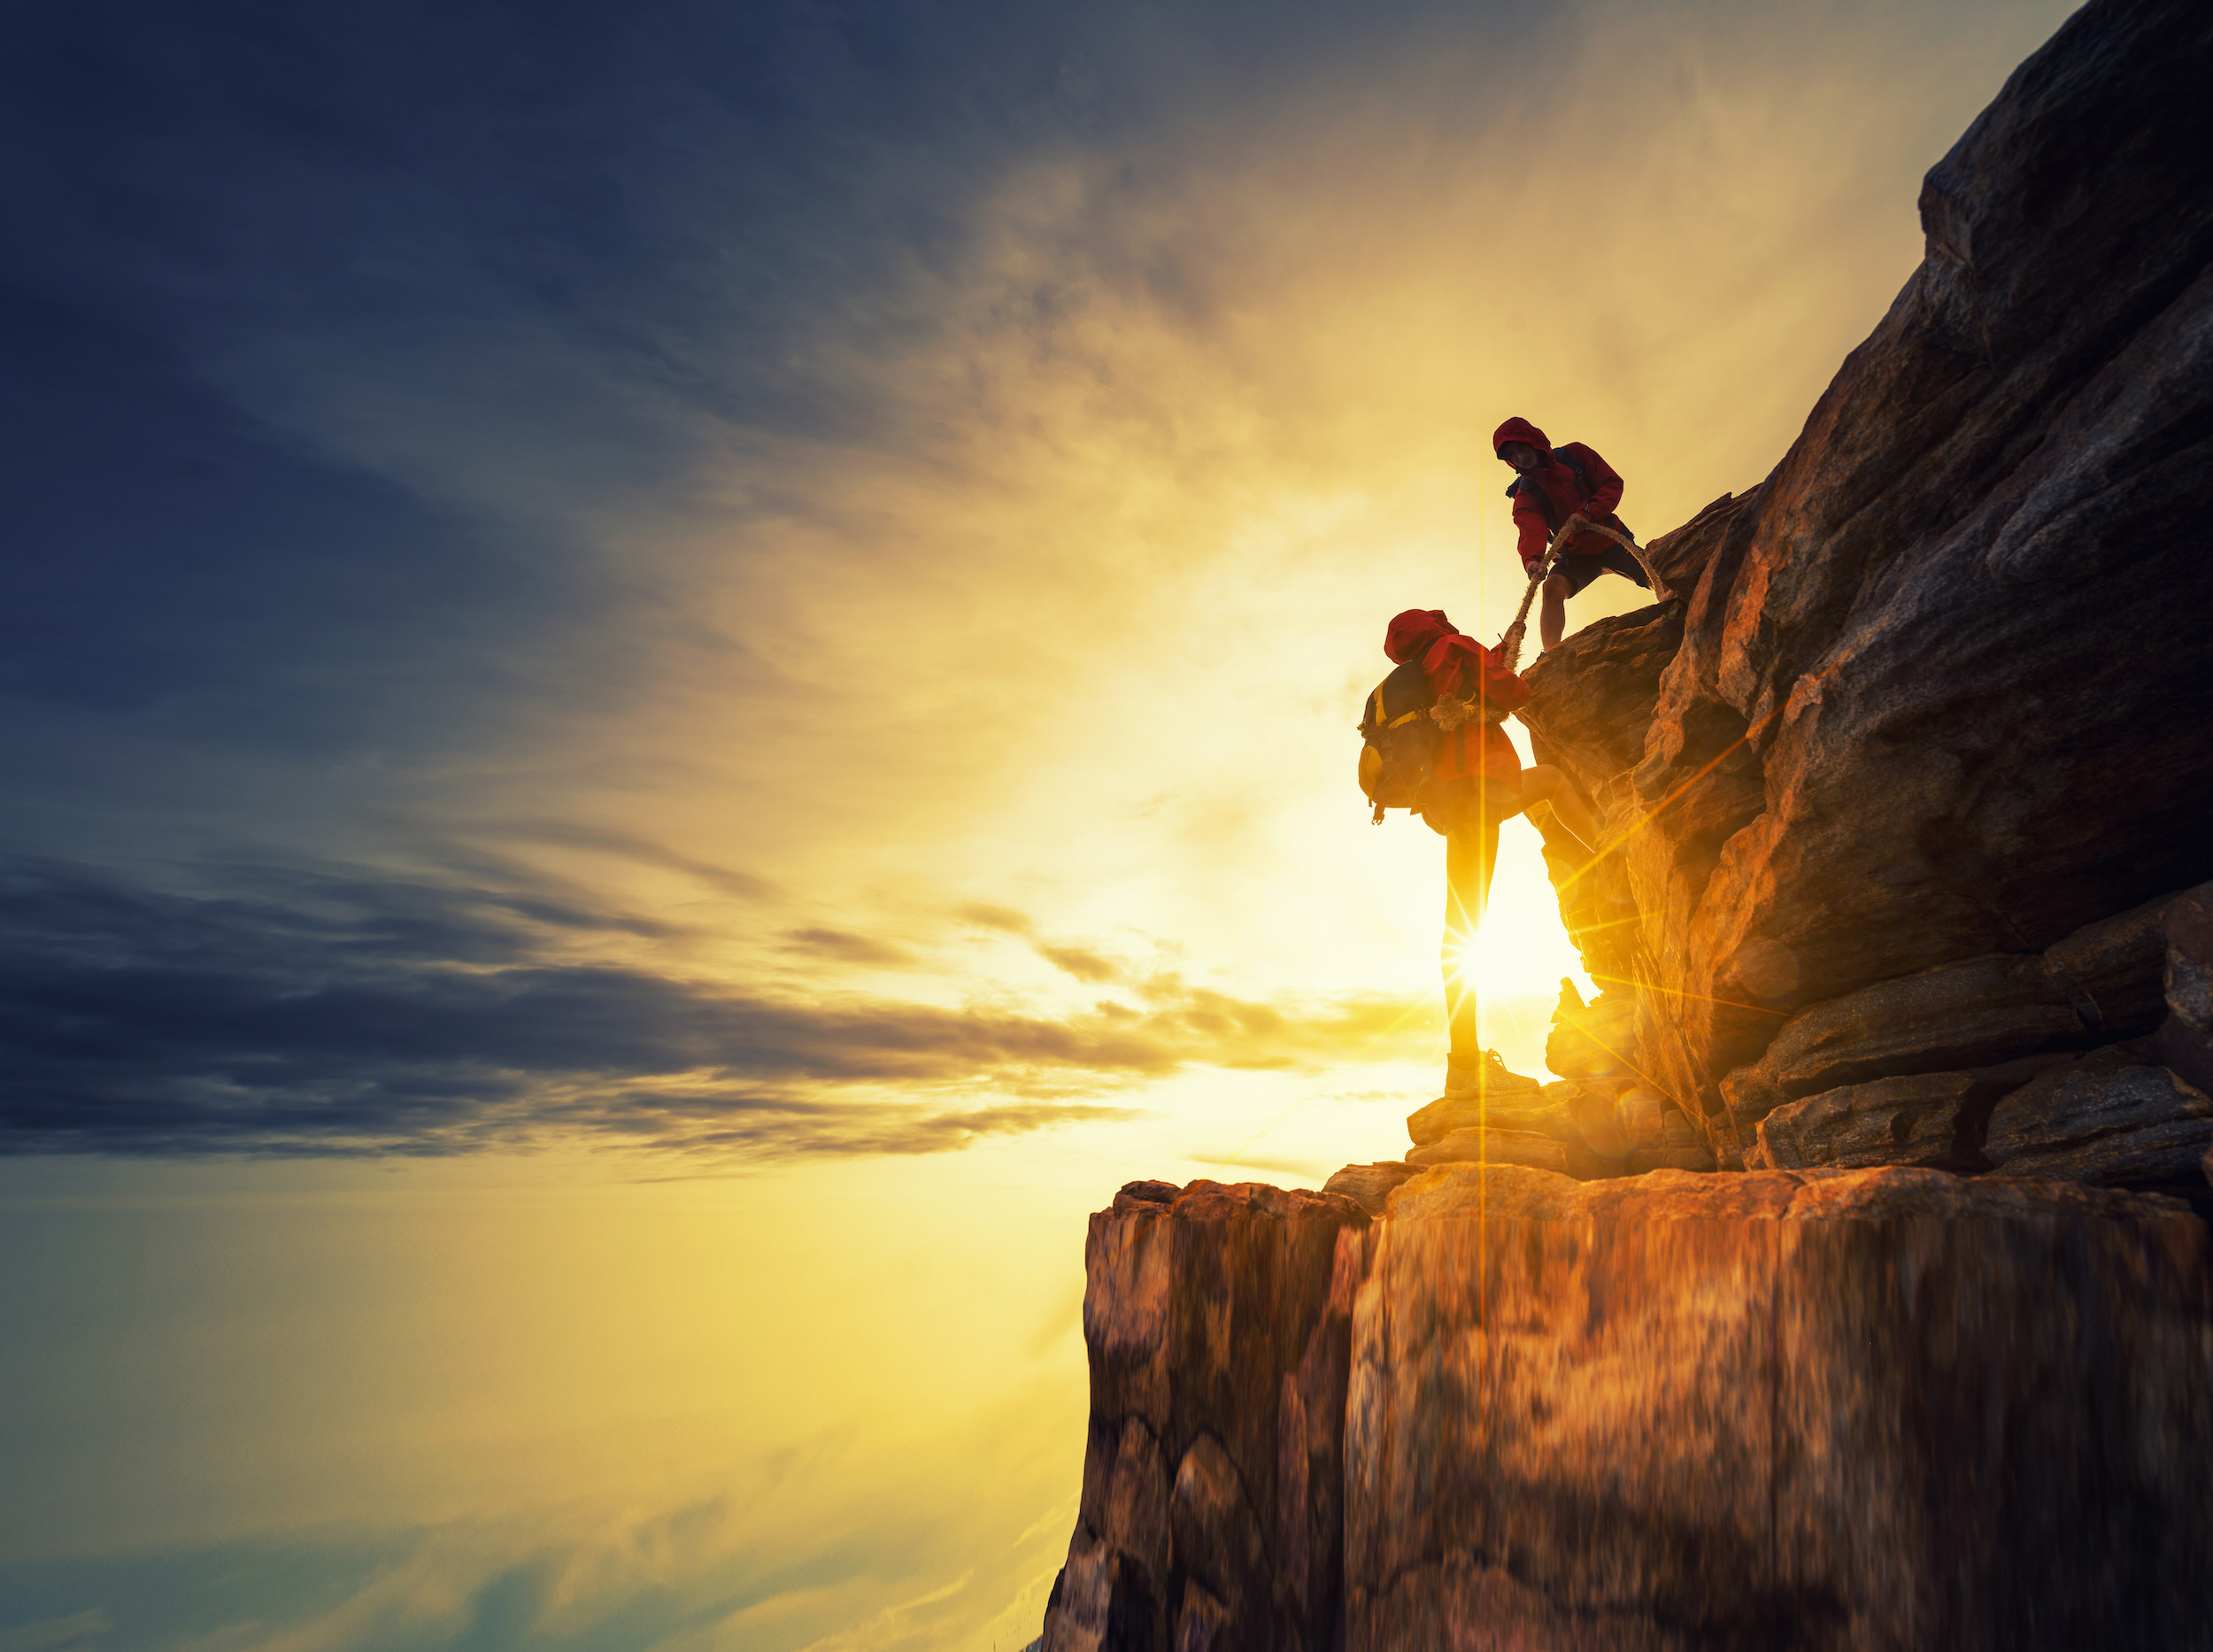 Leading a Company? Make Sure Your Journey Isn't a Solo Expedition